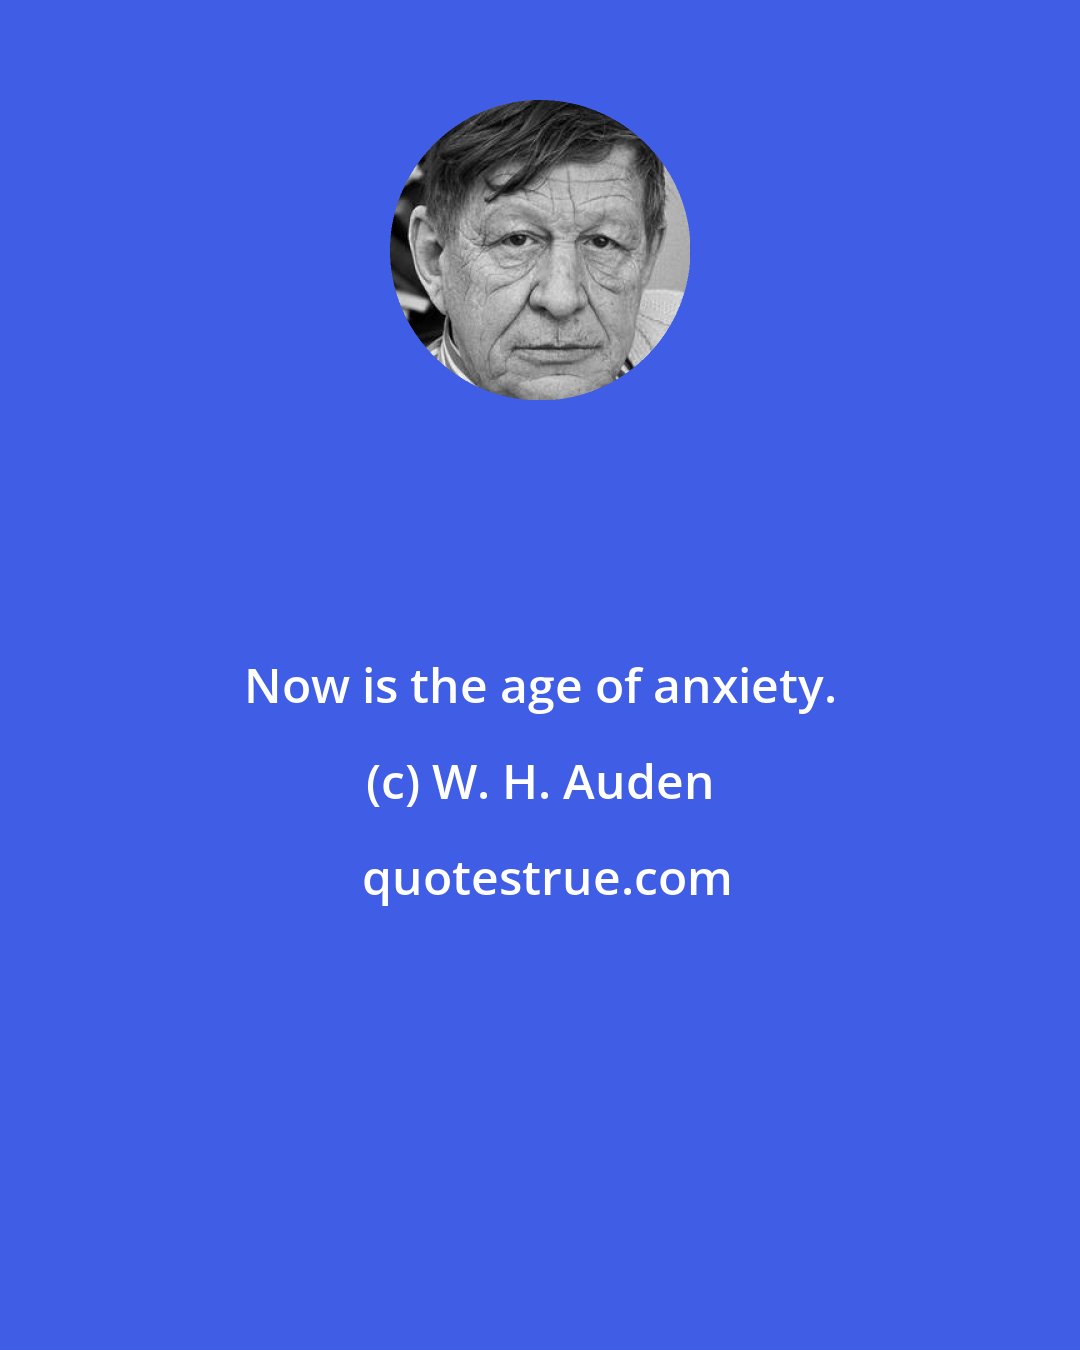 W. H. Auden: Now is the age of anxiety.